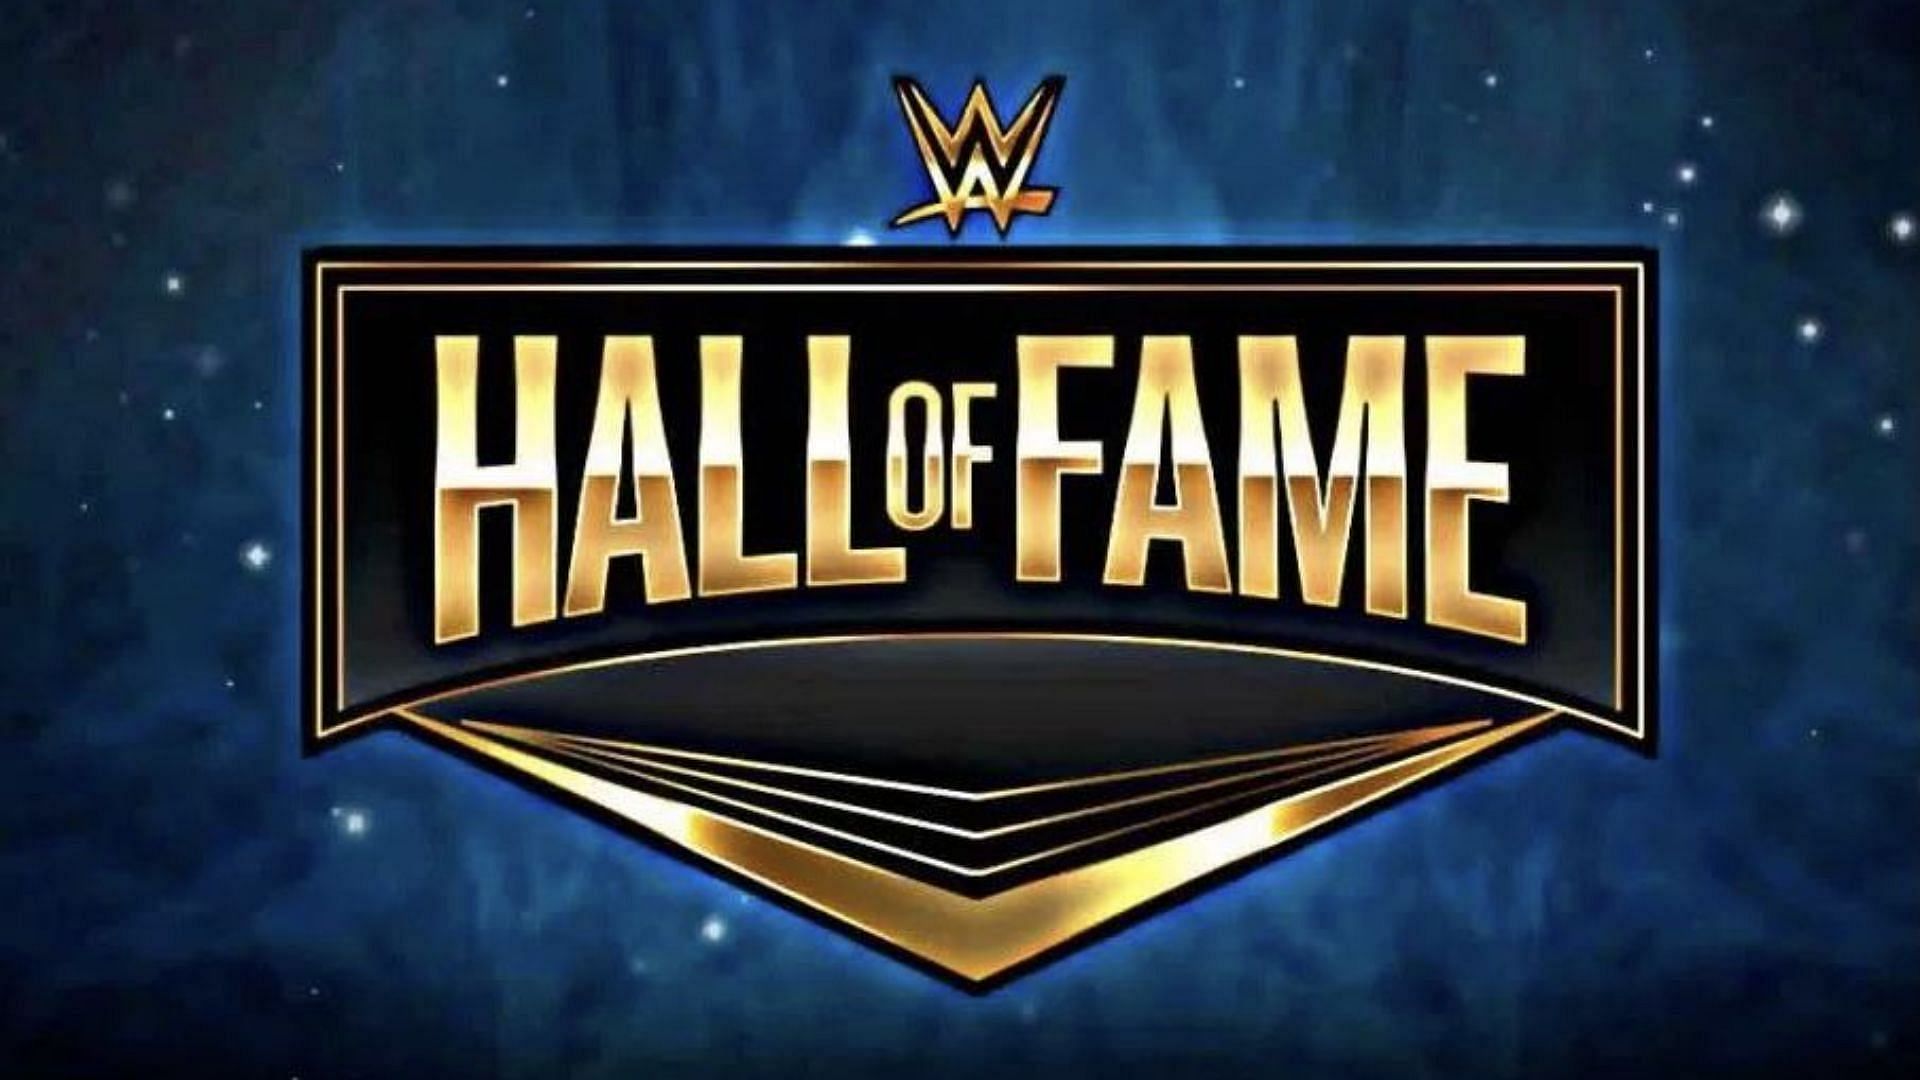 WWE Hall of Fame takes place on the night before WrestleMania